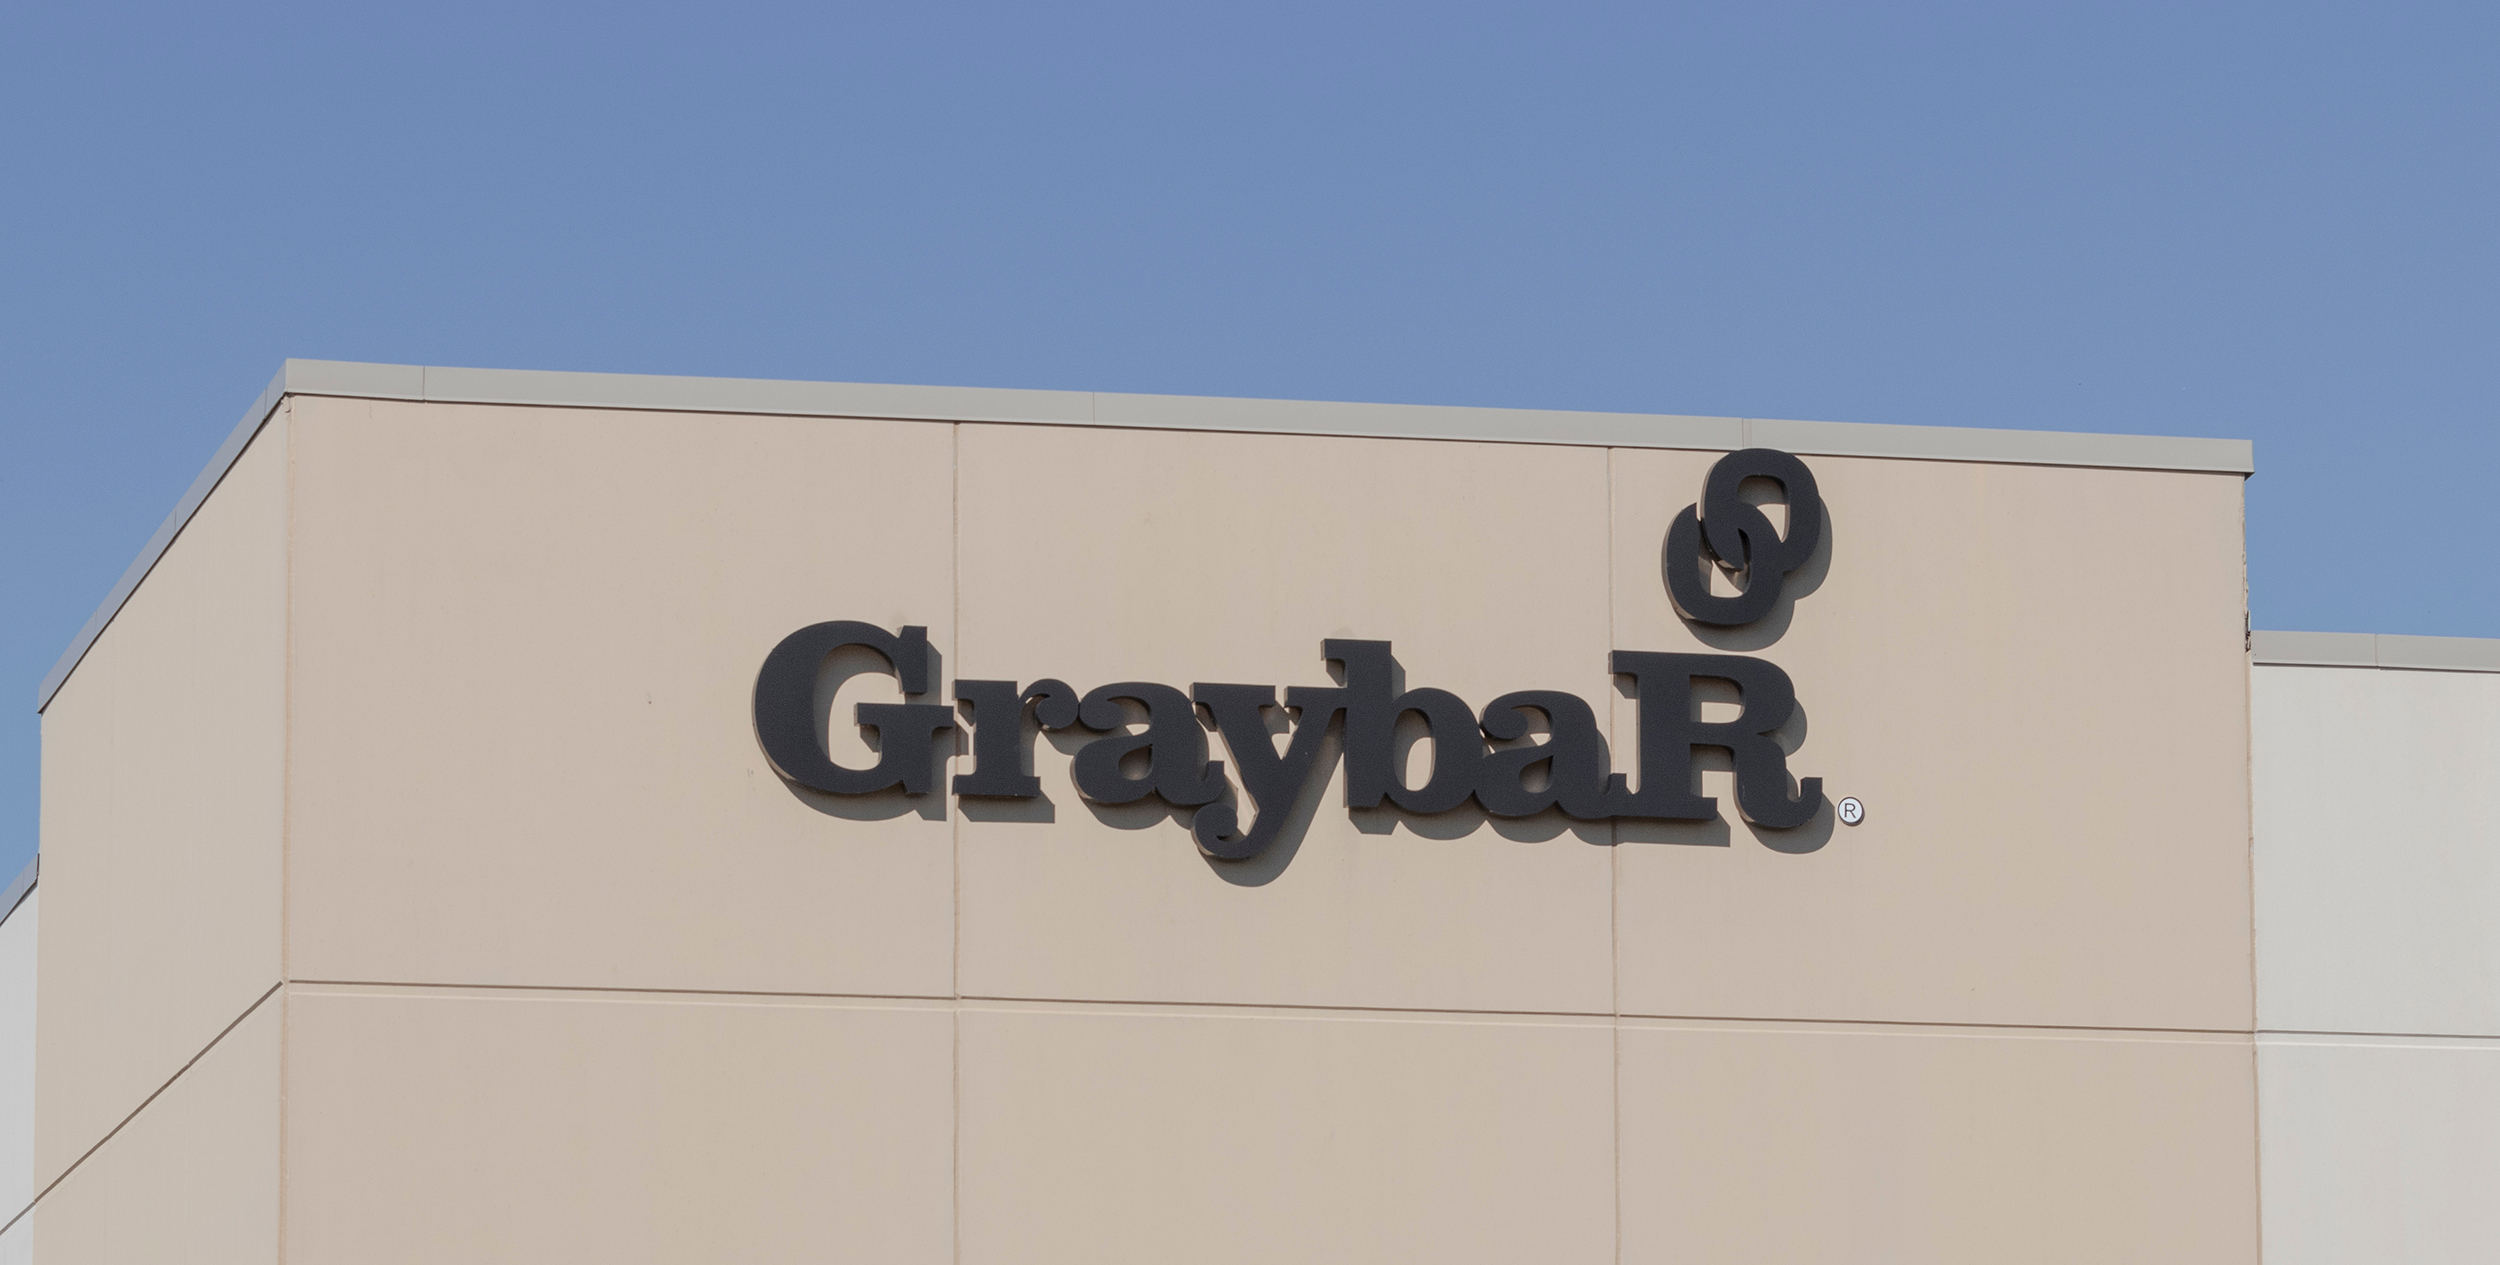 Indianapolis - Circa August 2022: Graybar electrical and telecommunications equipment distributor. Graybar is an employee-owned corporation.